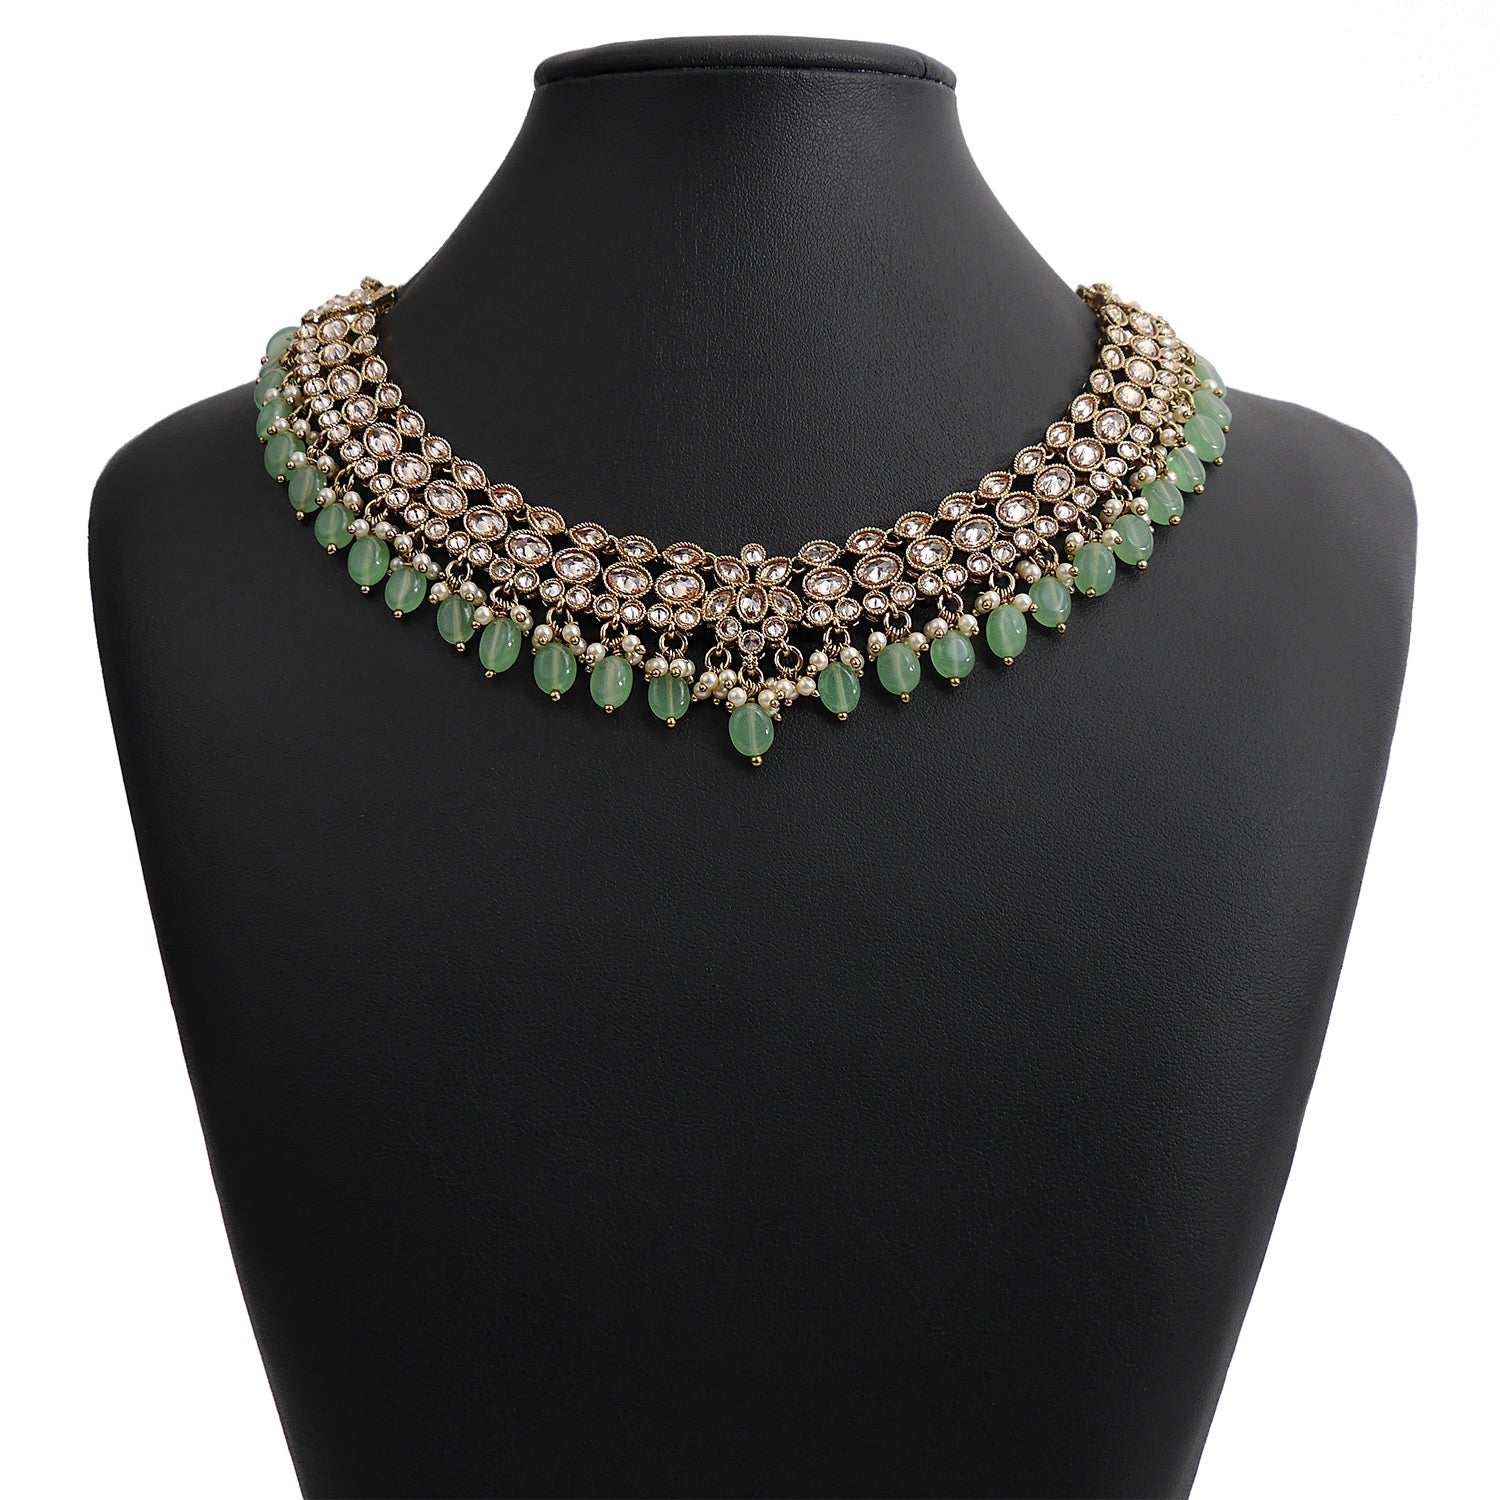 Aditi Necklace Set in Mint and Antique Gold